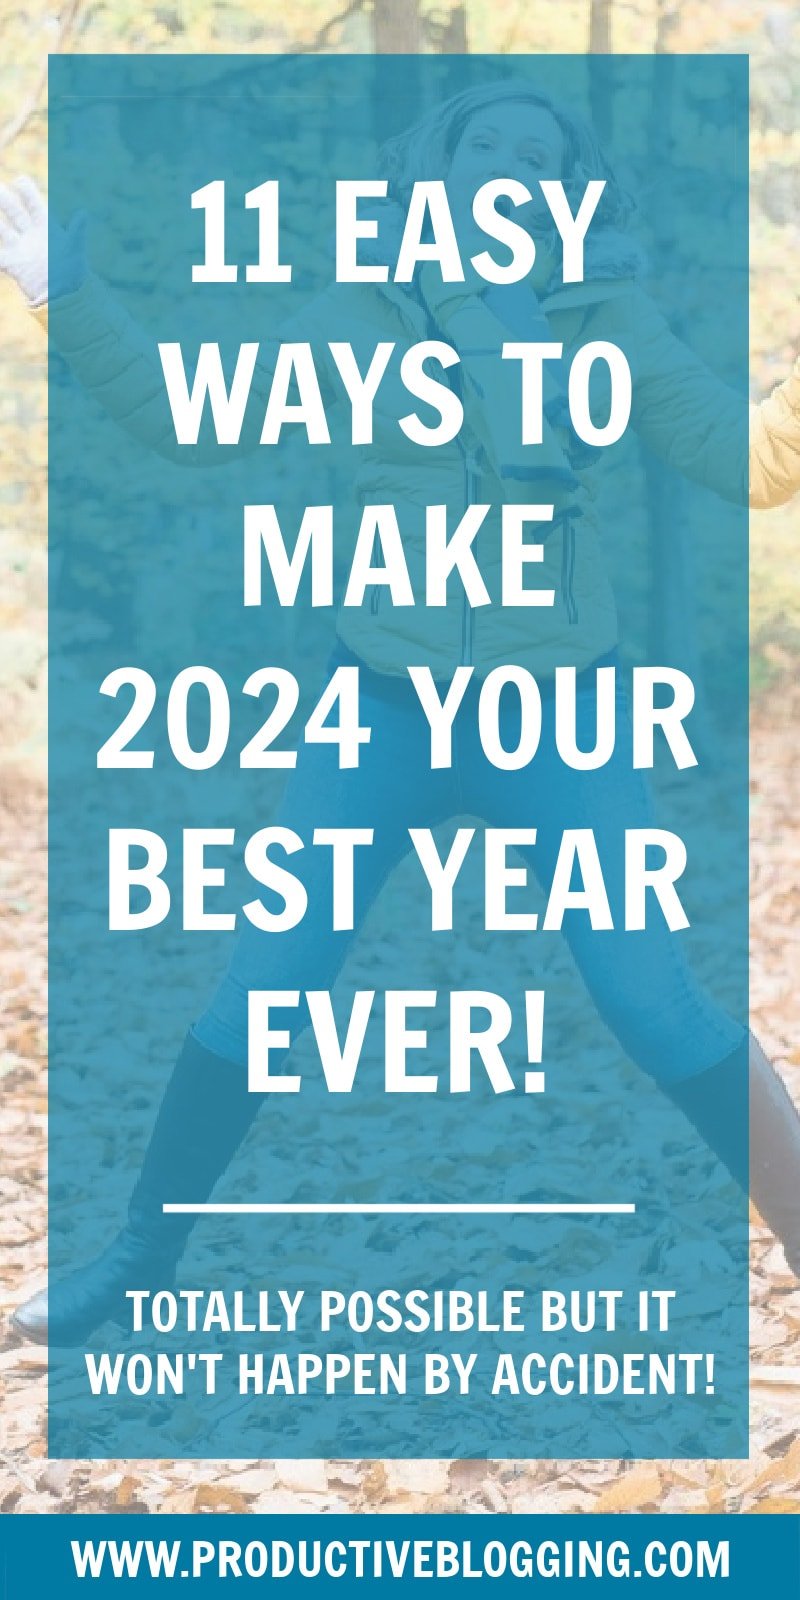 Hands up who wants to have an AWESOME 2024? You, me and the rest of the world, right? Time to face facts – that is not going to happen by accident. Having an amazing 2024 is totally possible, but it will take focus and effort. Here are 11 easy ways to make 2024 your best year EVER! #2024bestyearever #bestyearever2024 #bestyearever #2024goalsetting #goalsetting2024 #blogging #bloggers #blog #blogging2024 #2024blogging #bloggingtips #productivity #productivitytips #productiveblogging